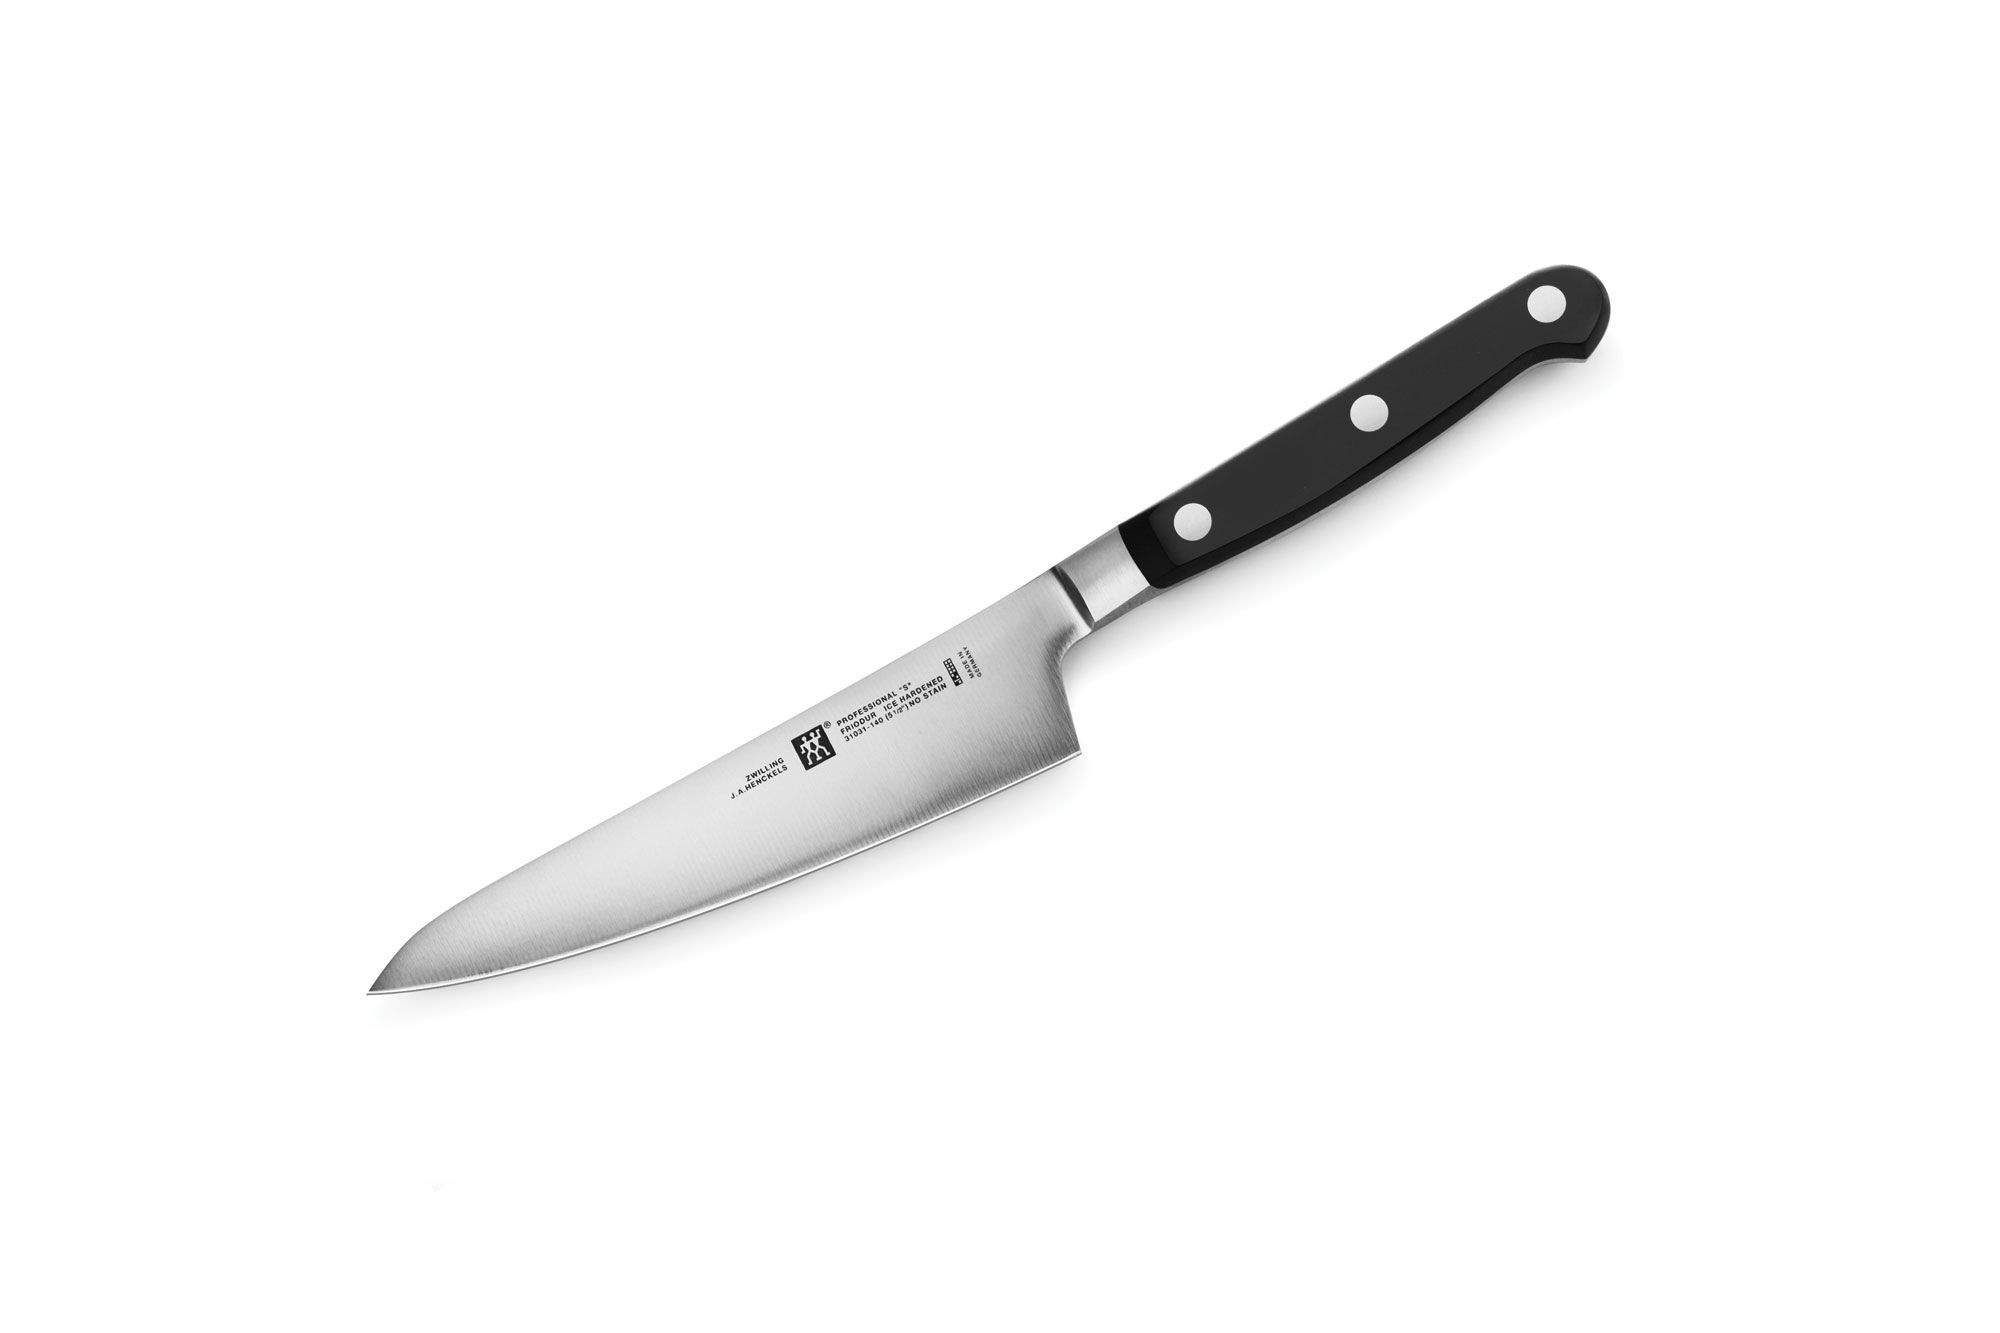 Zwilling J.A. Henckels Professional 12-Inch Oval Sharpening Steel